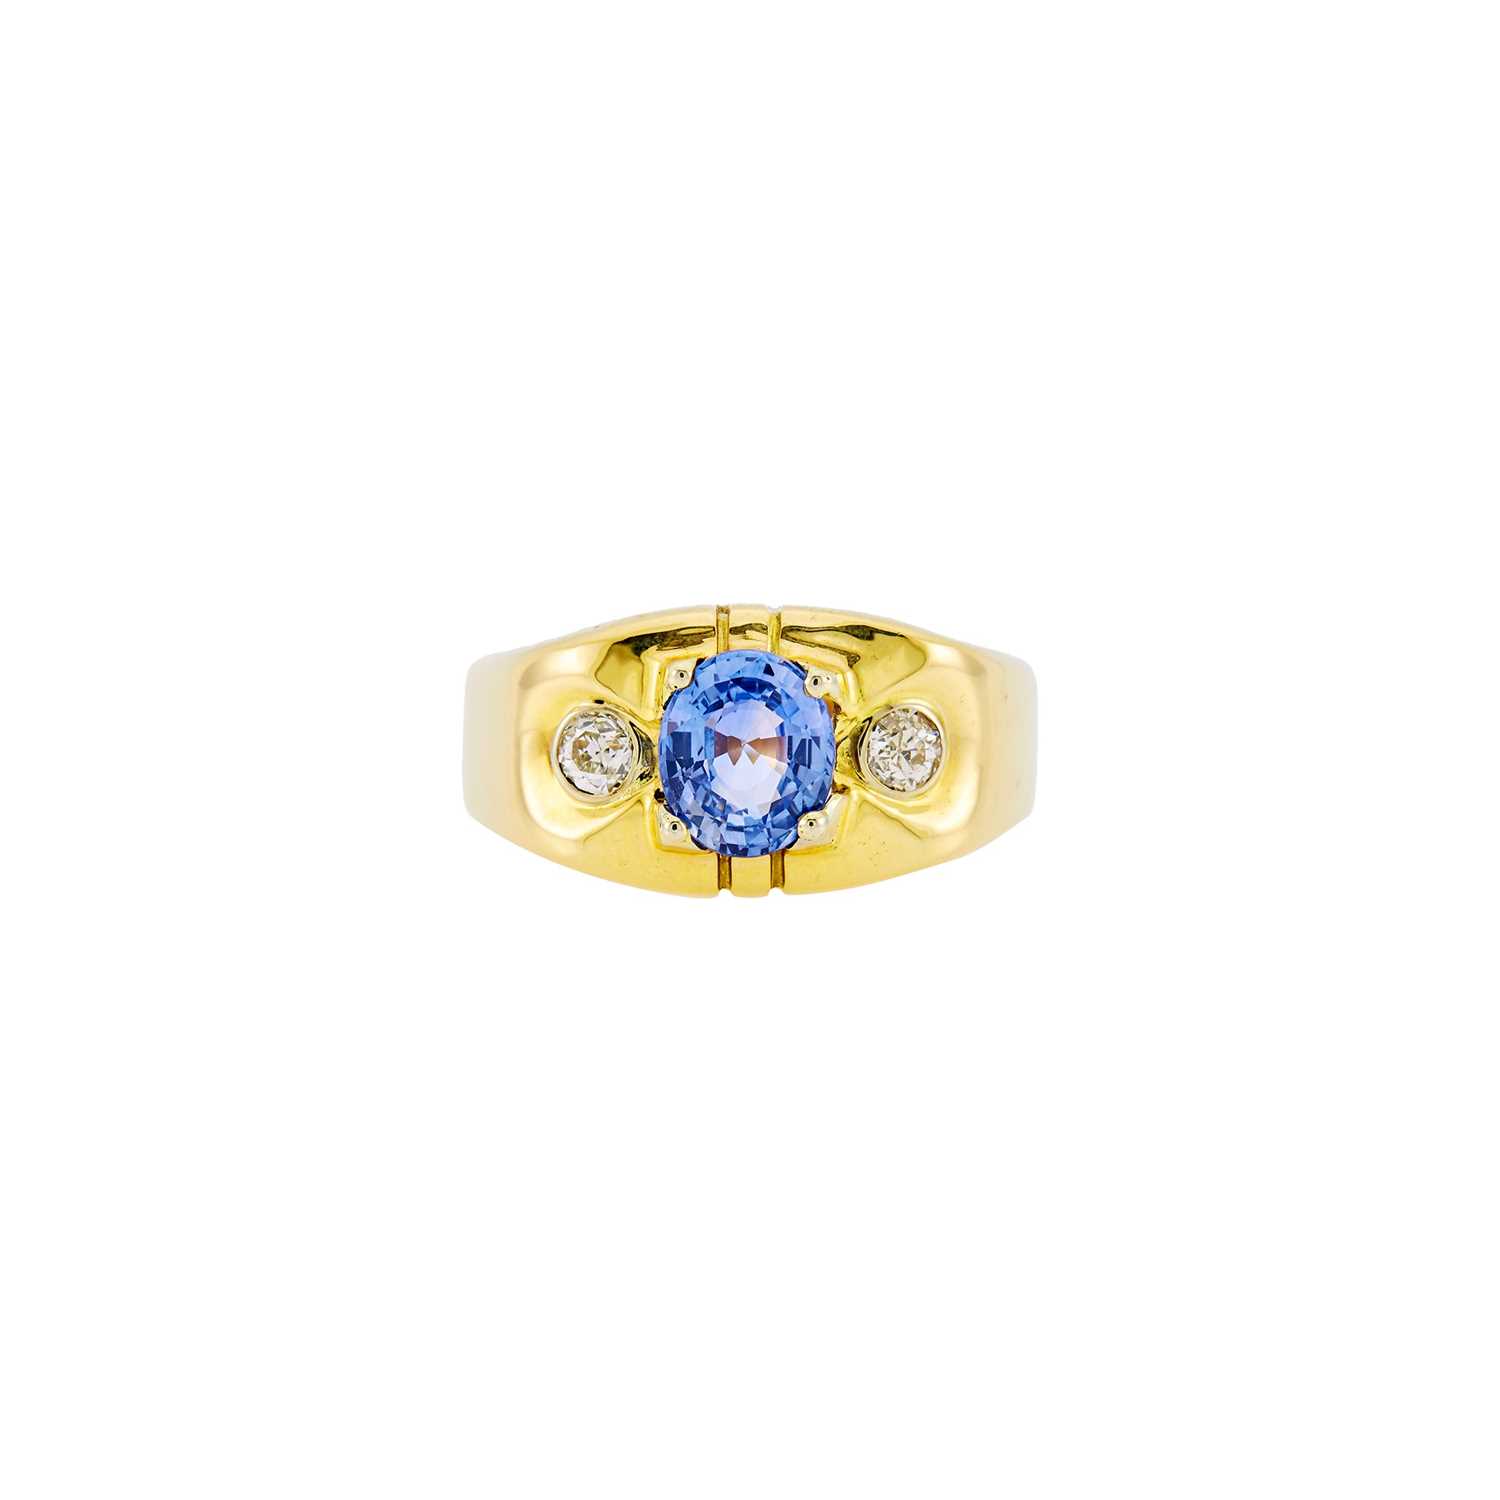 Lot 1229 - Gold, Sapphire and Diamond Ring